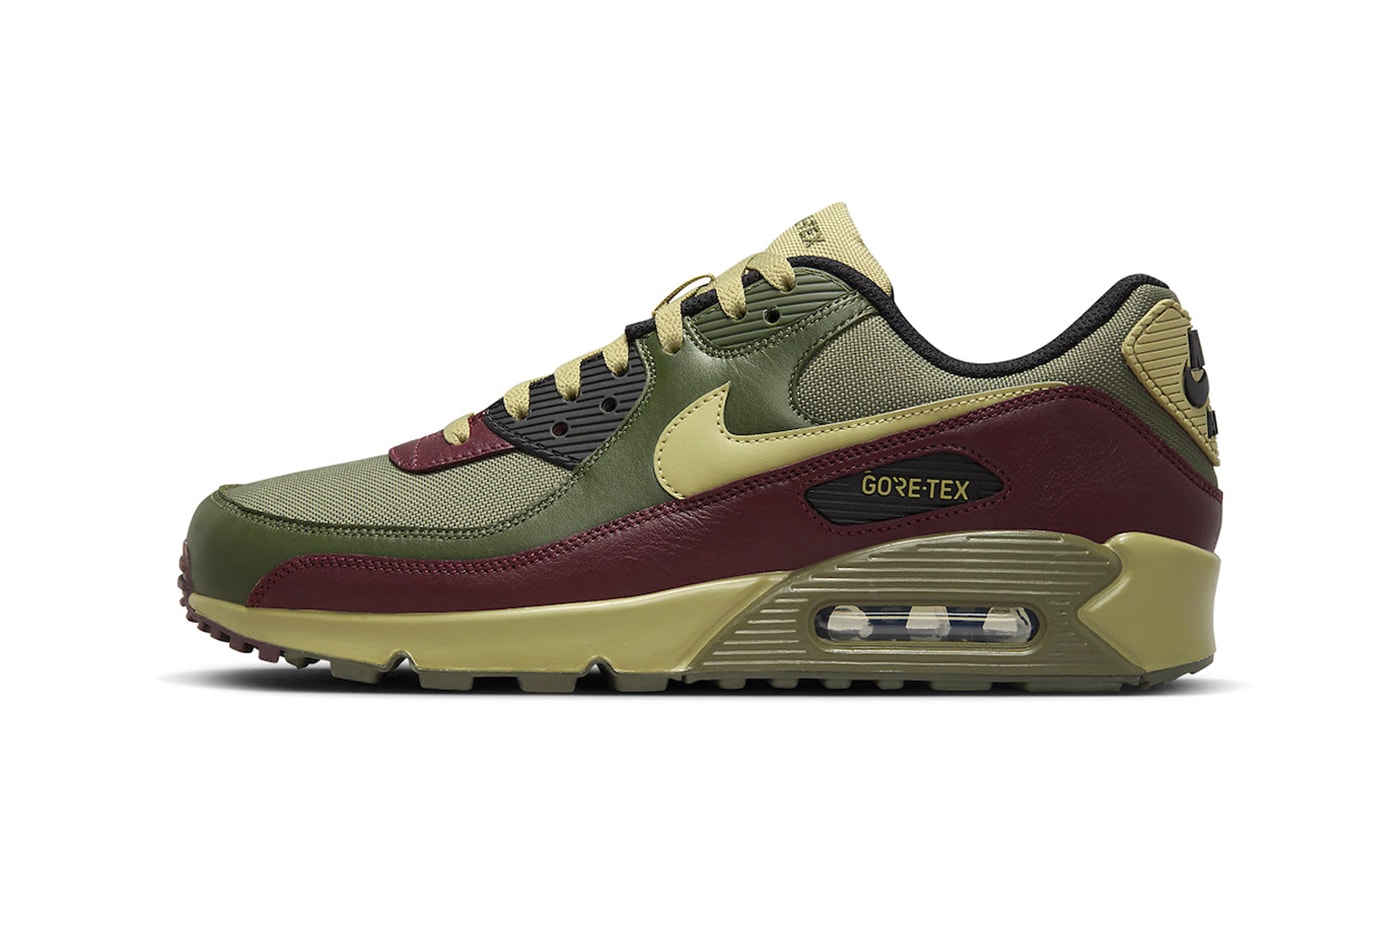 Nike Air Max 90 Gore-Tex Arrives in "Medium Olive" FD5810-200 Medium Olive/Neutral Olive-Cargo Khaki swoosh shoes technical multi purpose weather shoes